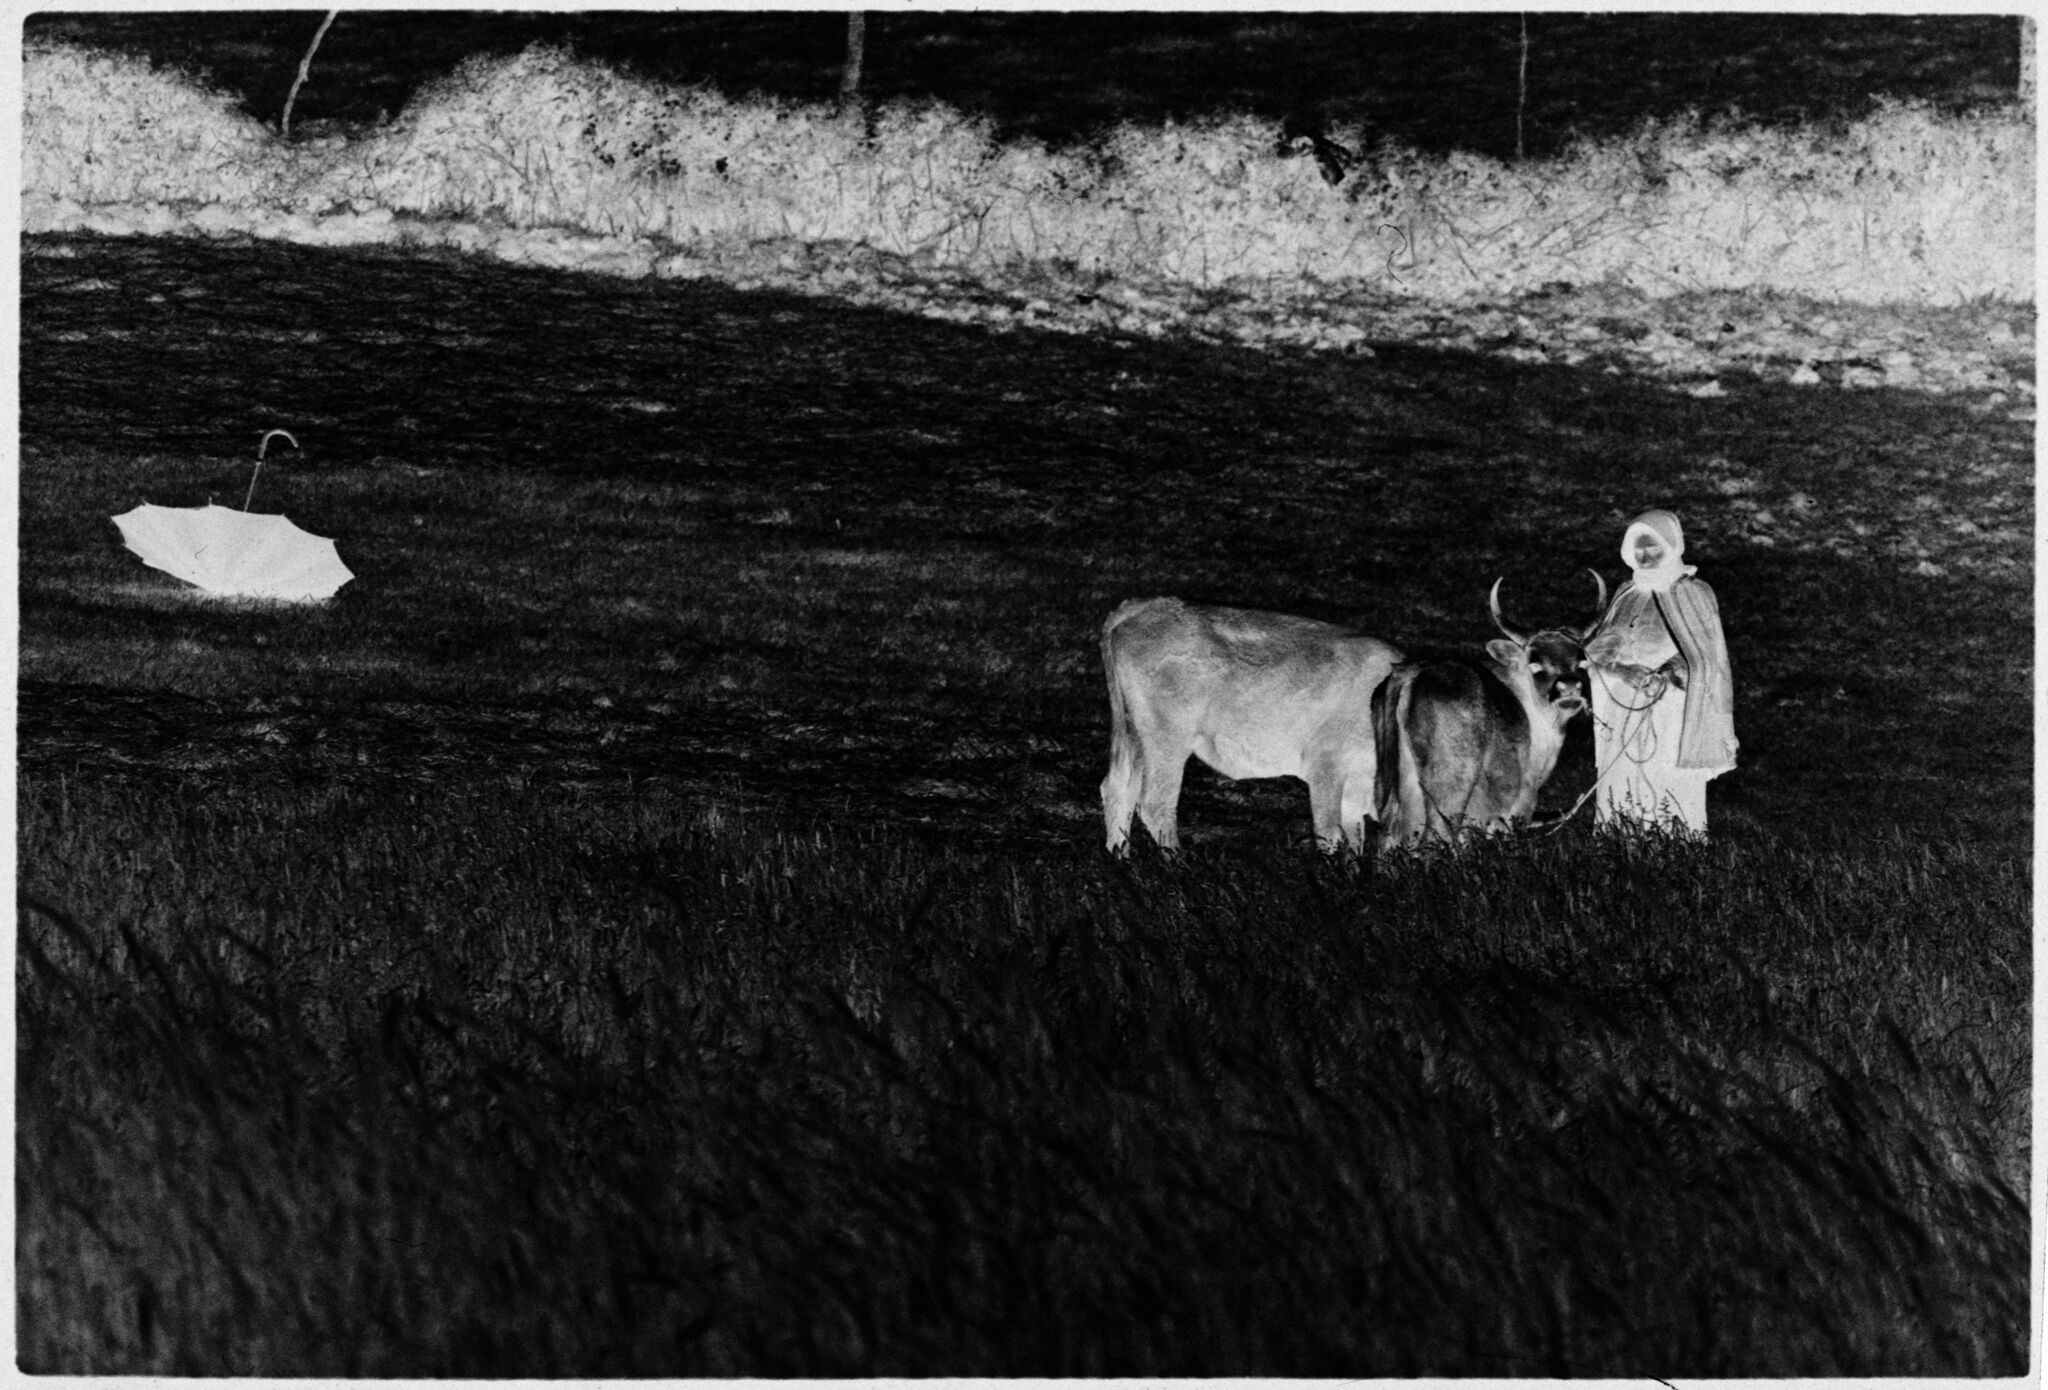 Untitled (Woman With Two Cows In Grassy Field; Overturned Umbrella In Background, Nazaré, Portugal)